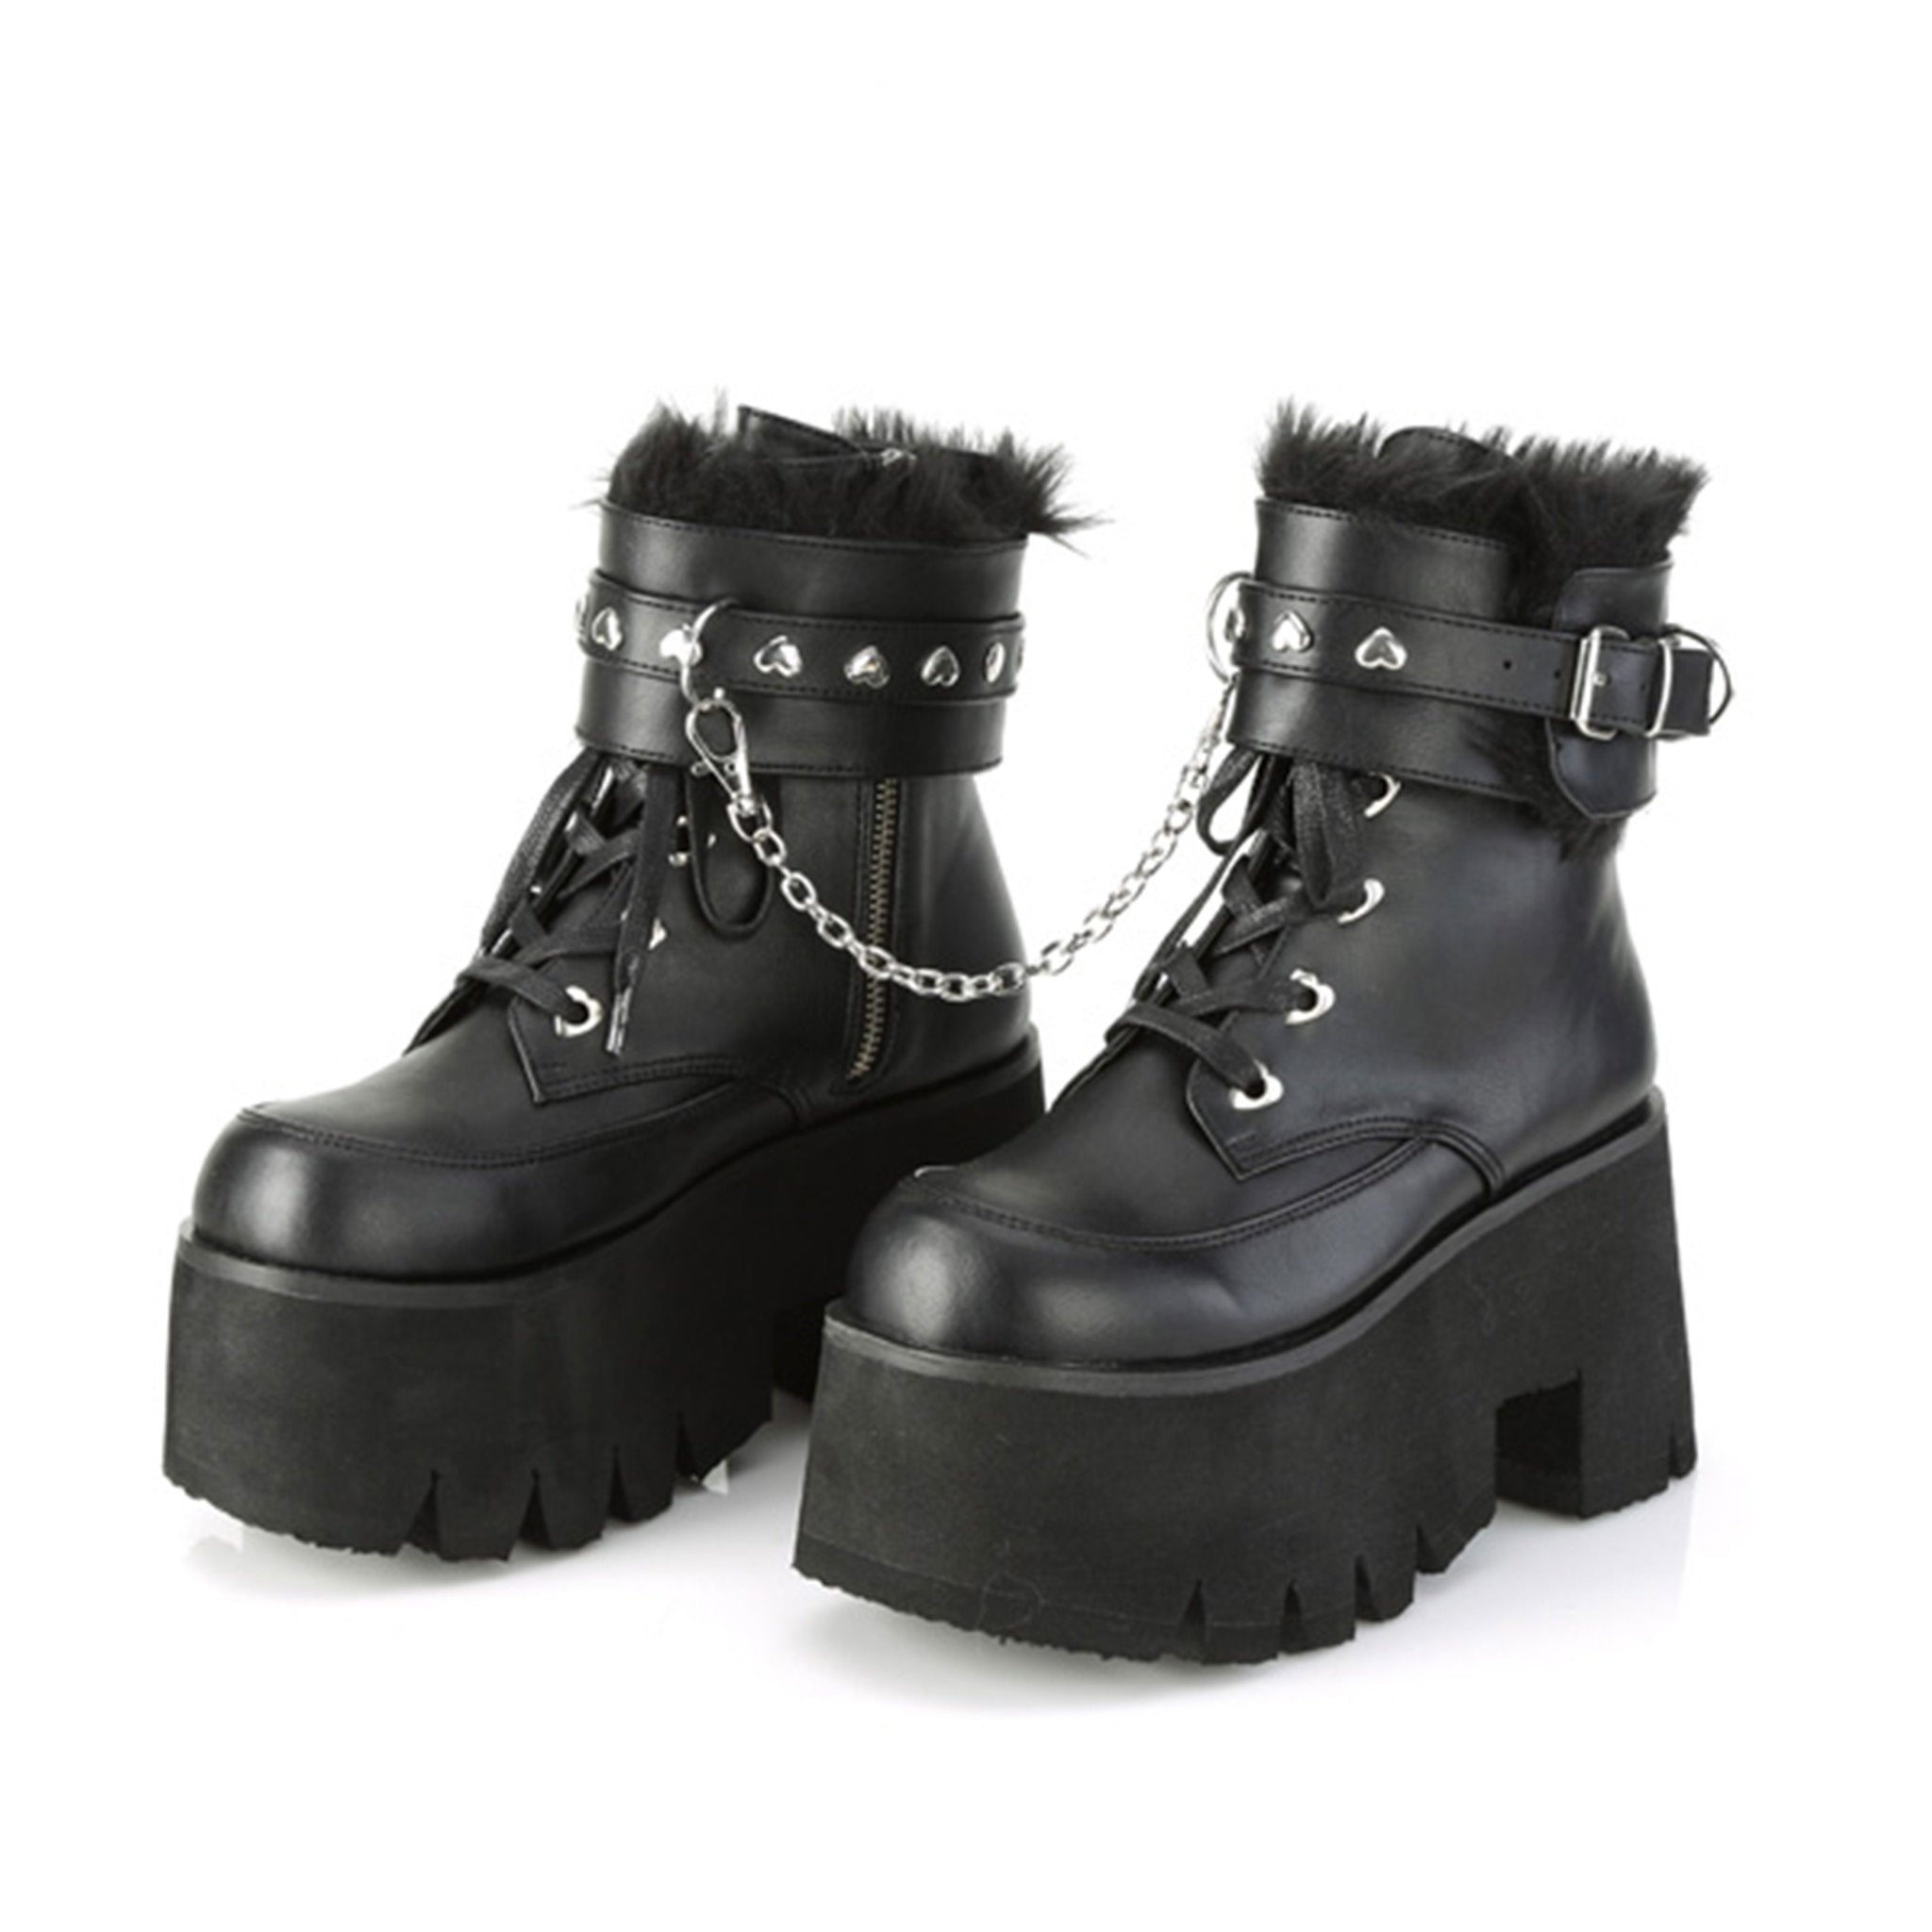 Chunky Lace-up Platform Booties with Detach Furry Ankle Restraints